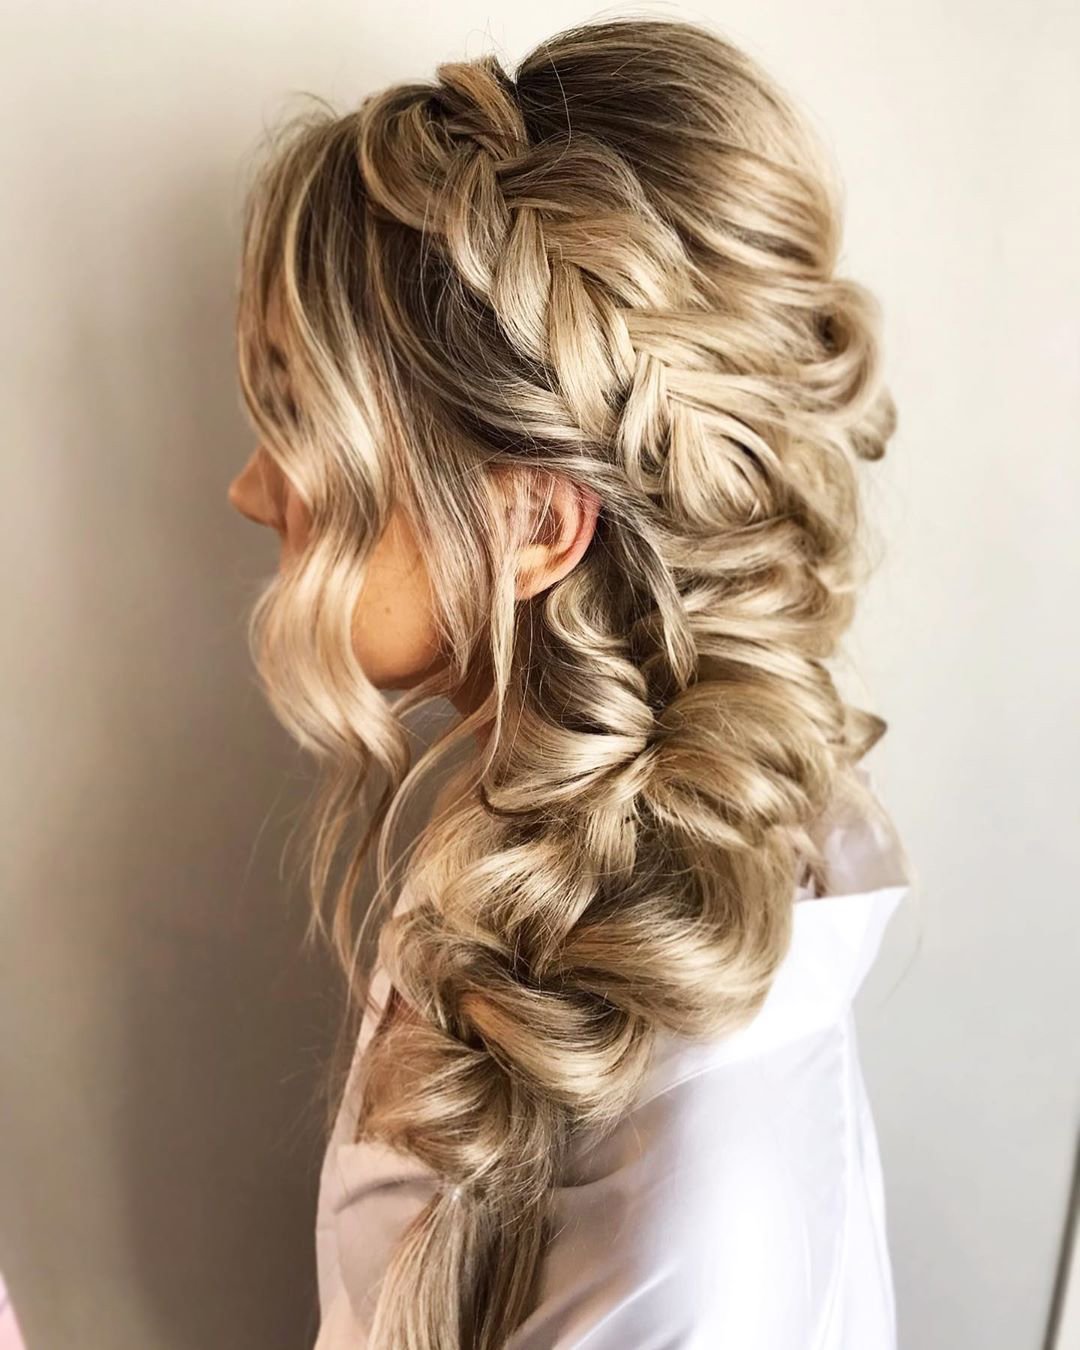 braided wedding hair messy side braid with loose curls svglamour